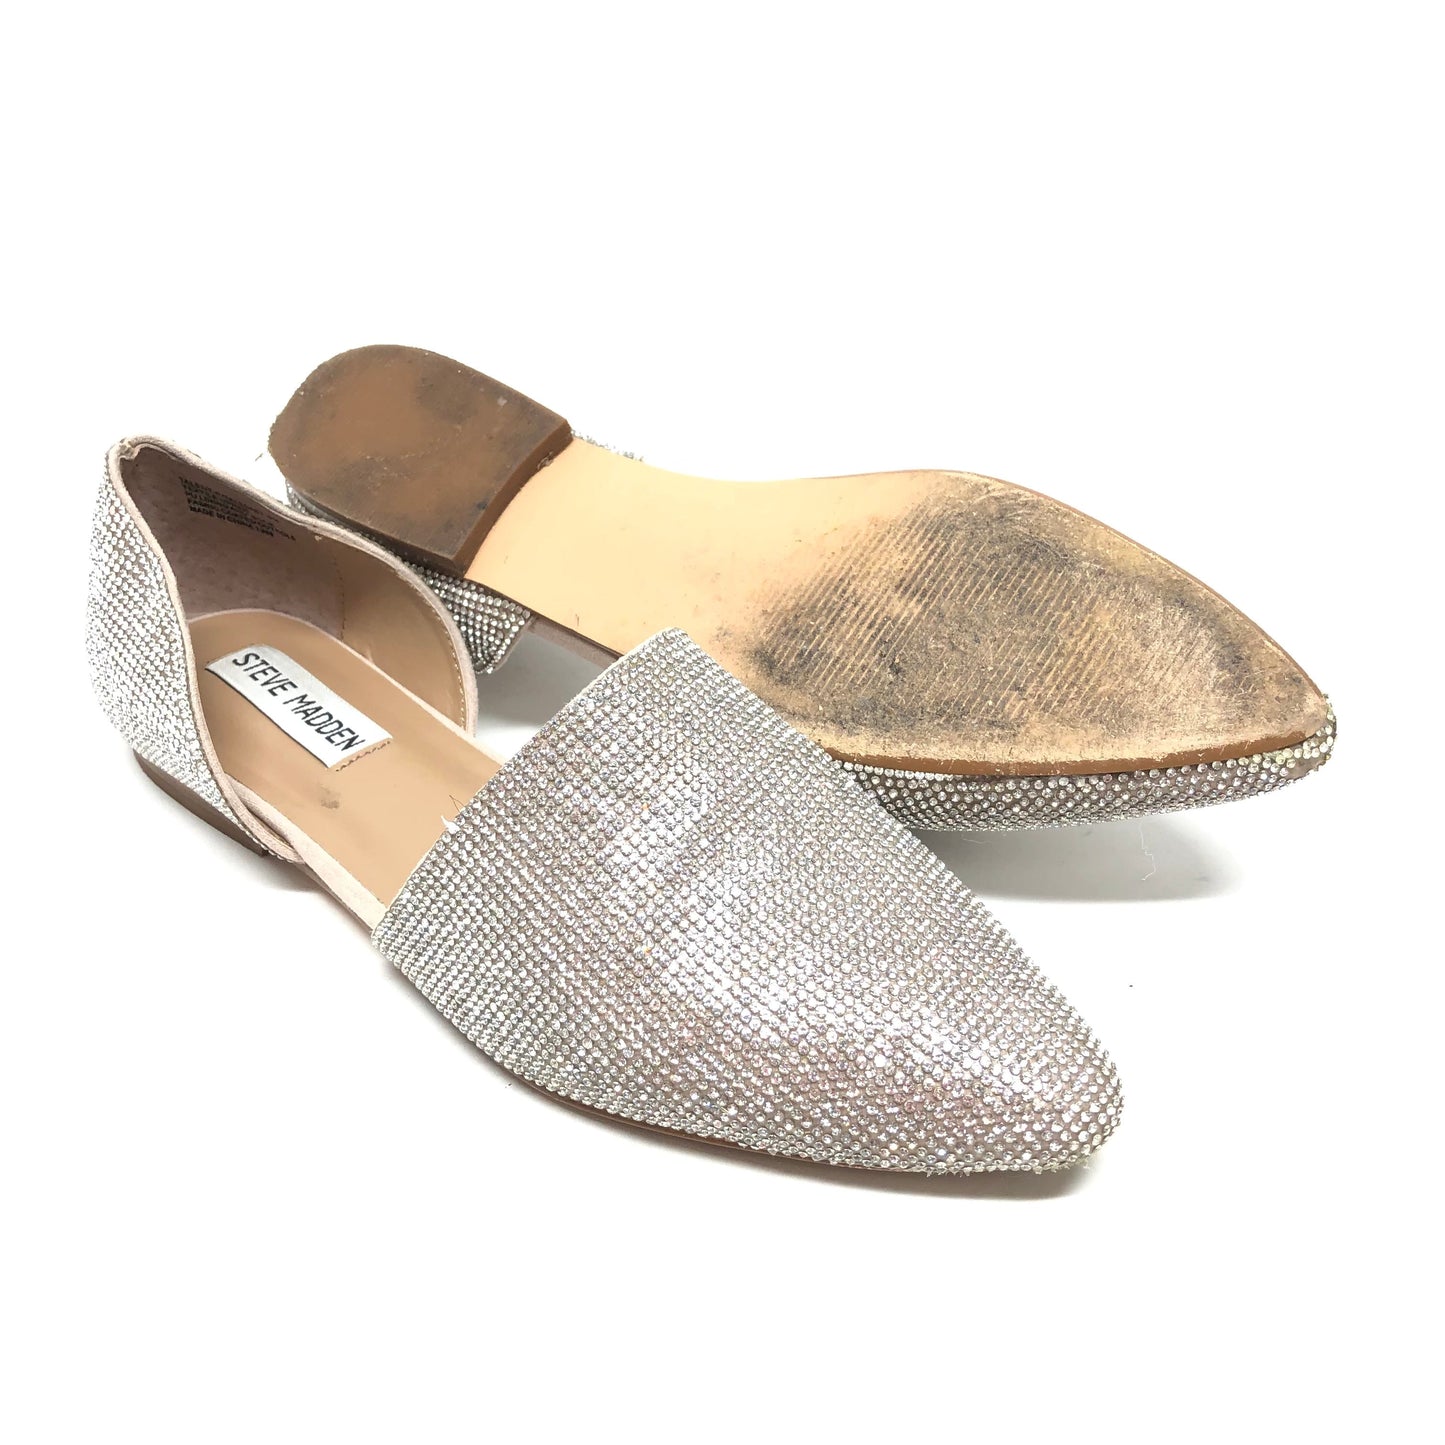 Silver Shoes Flats Steve Madden, Size 8